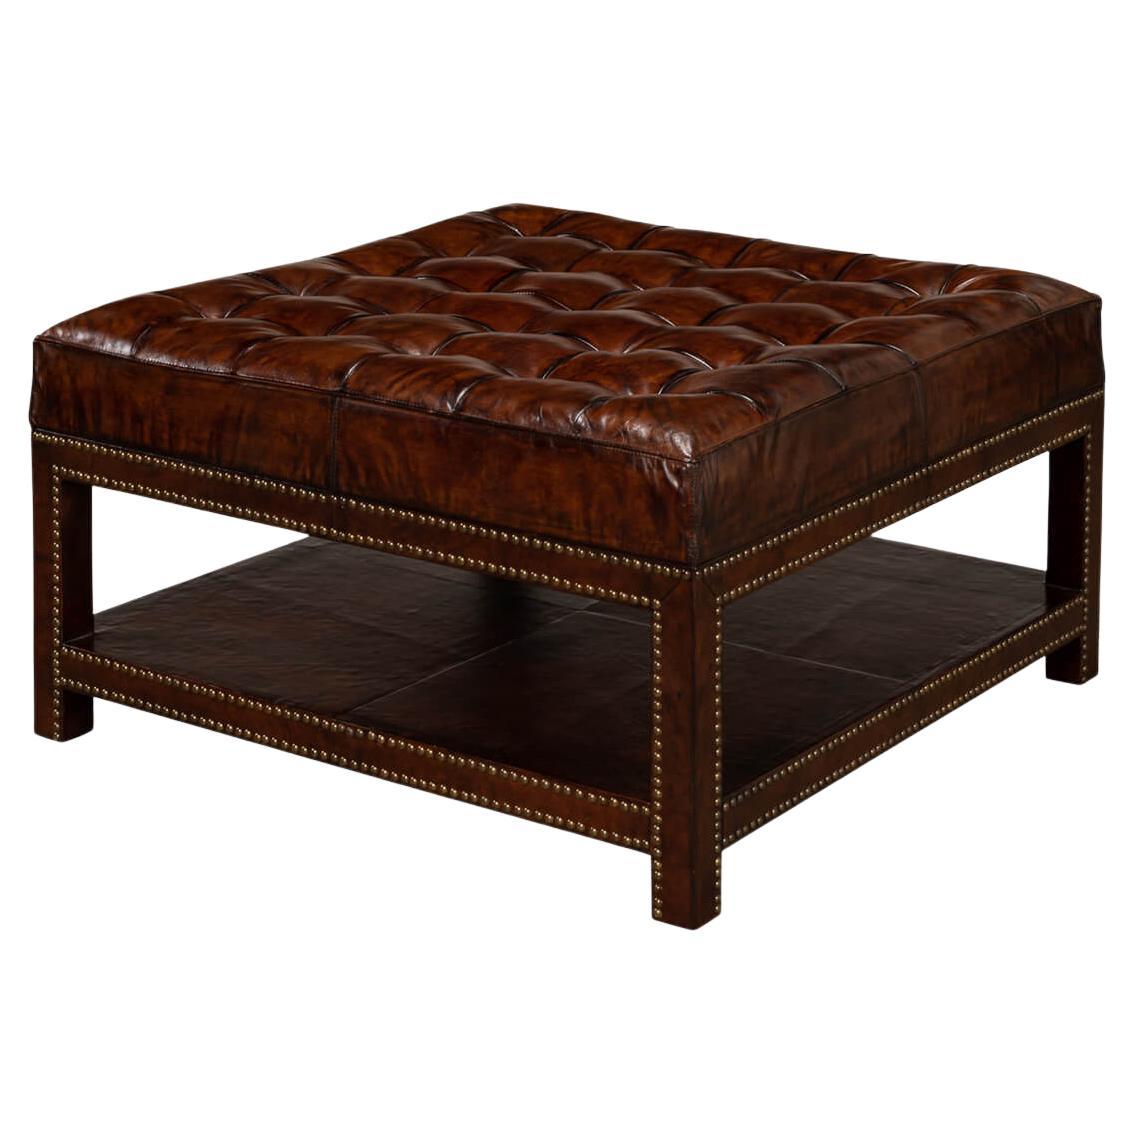 Vintage-Style Tufted Leather Ottoman